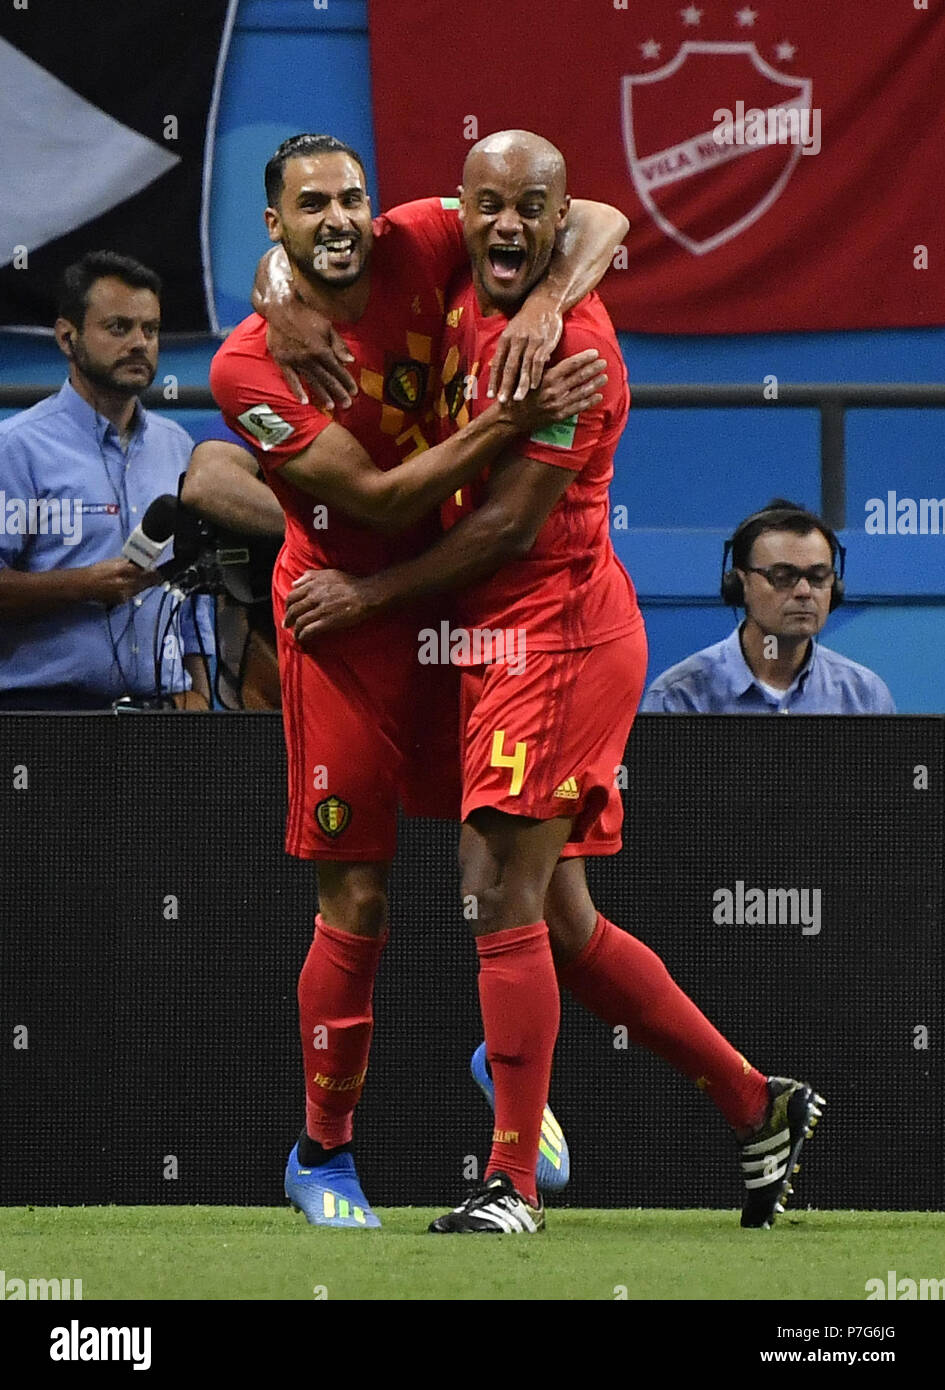 Kazan, Russia. 6th July, 2018. Nacer Chadli (L) and Vincent Kompany of Belgium celebrate during the 2018 FIFA World Cup quarter-final match between Brazil and Belgium in Kazan, Russia, July 6, 2018. Credit: He Canling/Xinhua/Alamy Live News Stock Photo